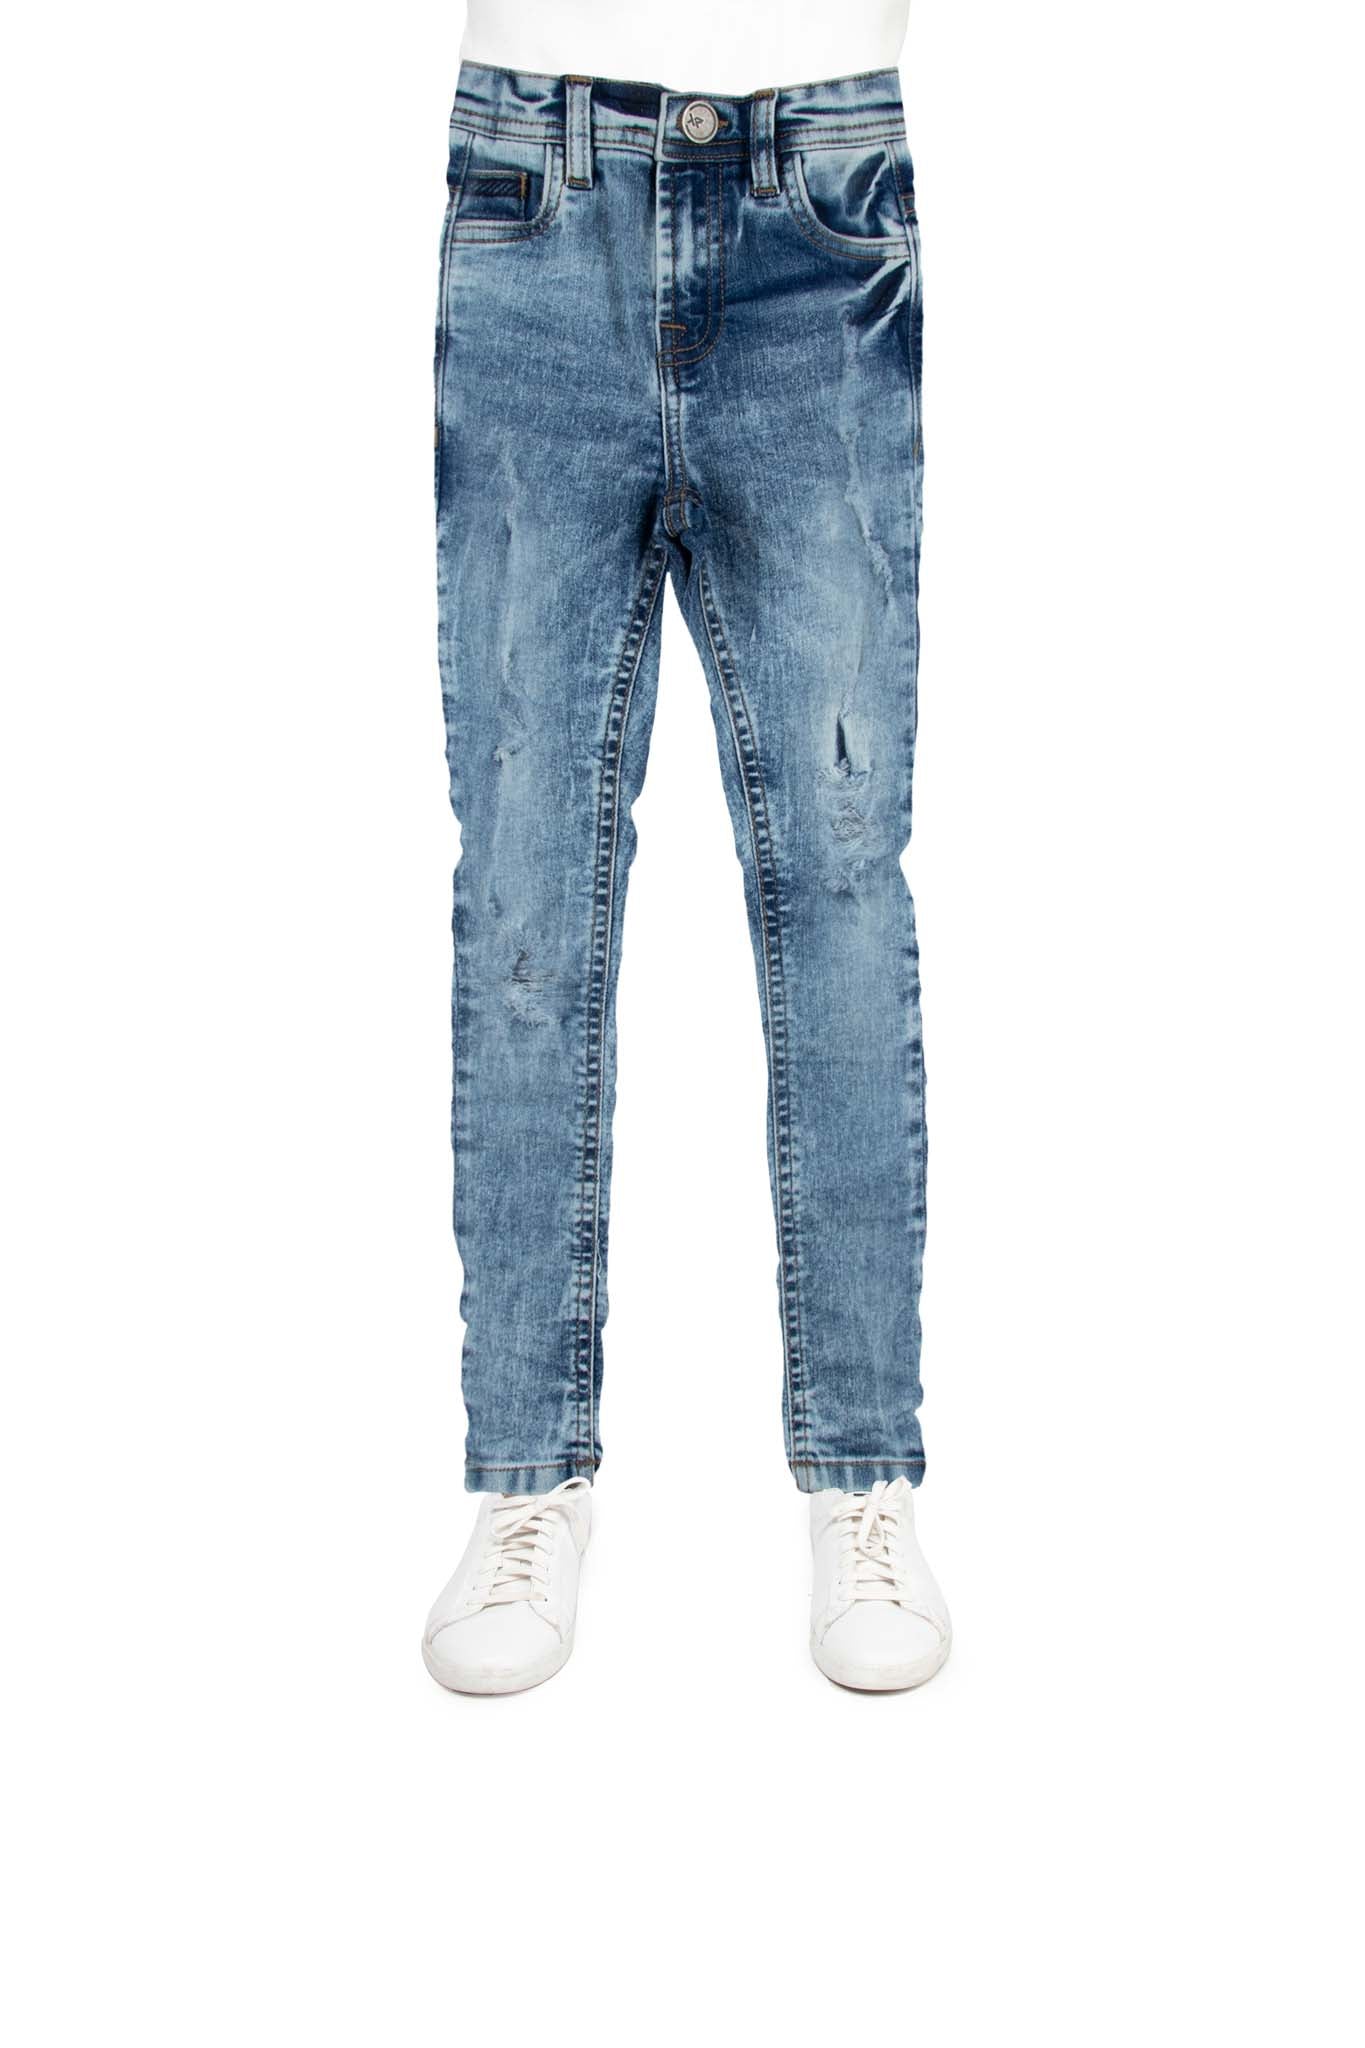 X RAY Skinny Ripped Jeans for Boys Distressed Slim Fit Denim Pants